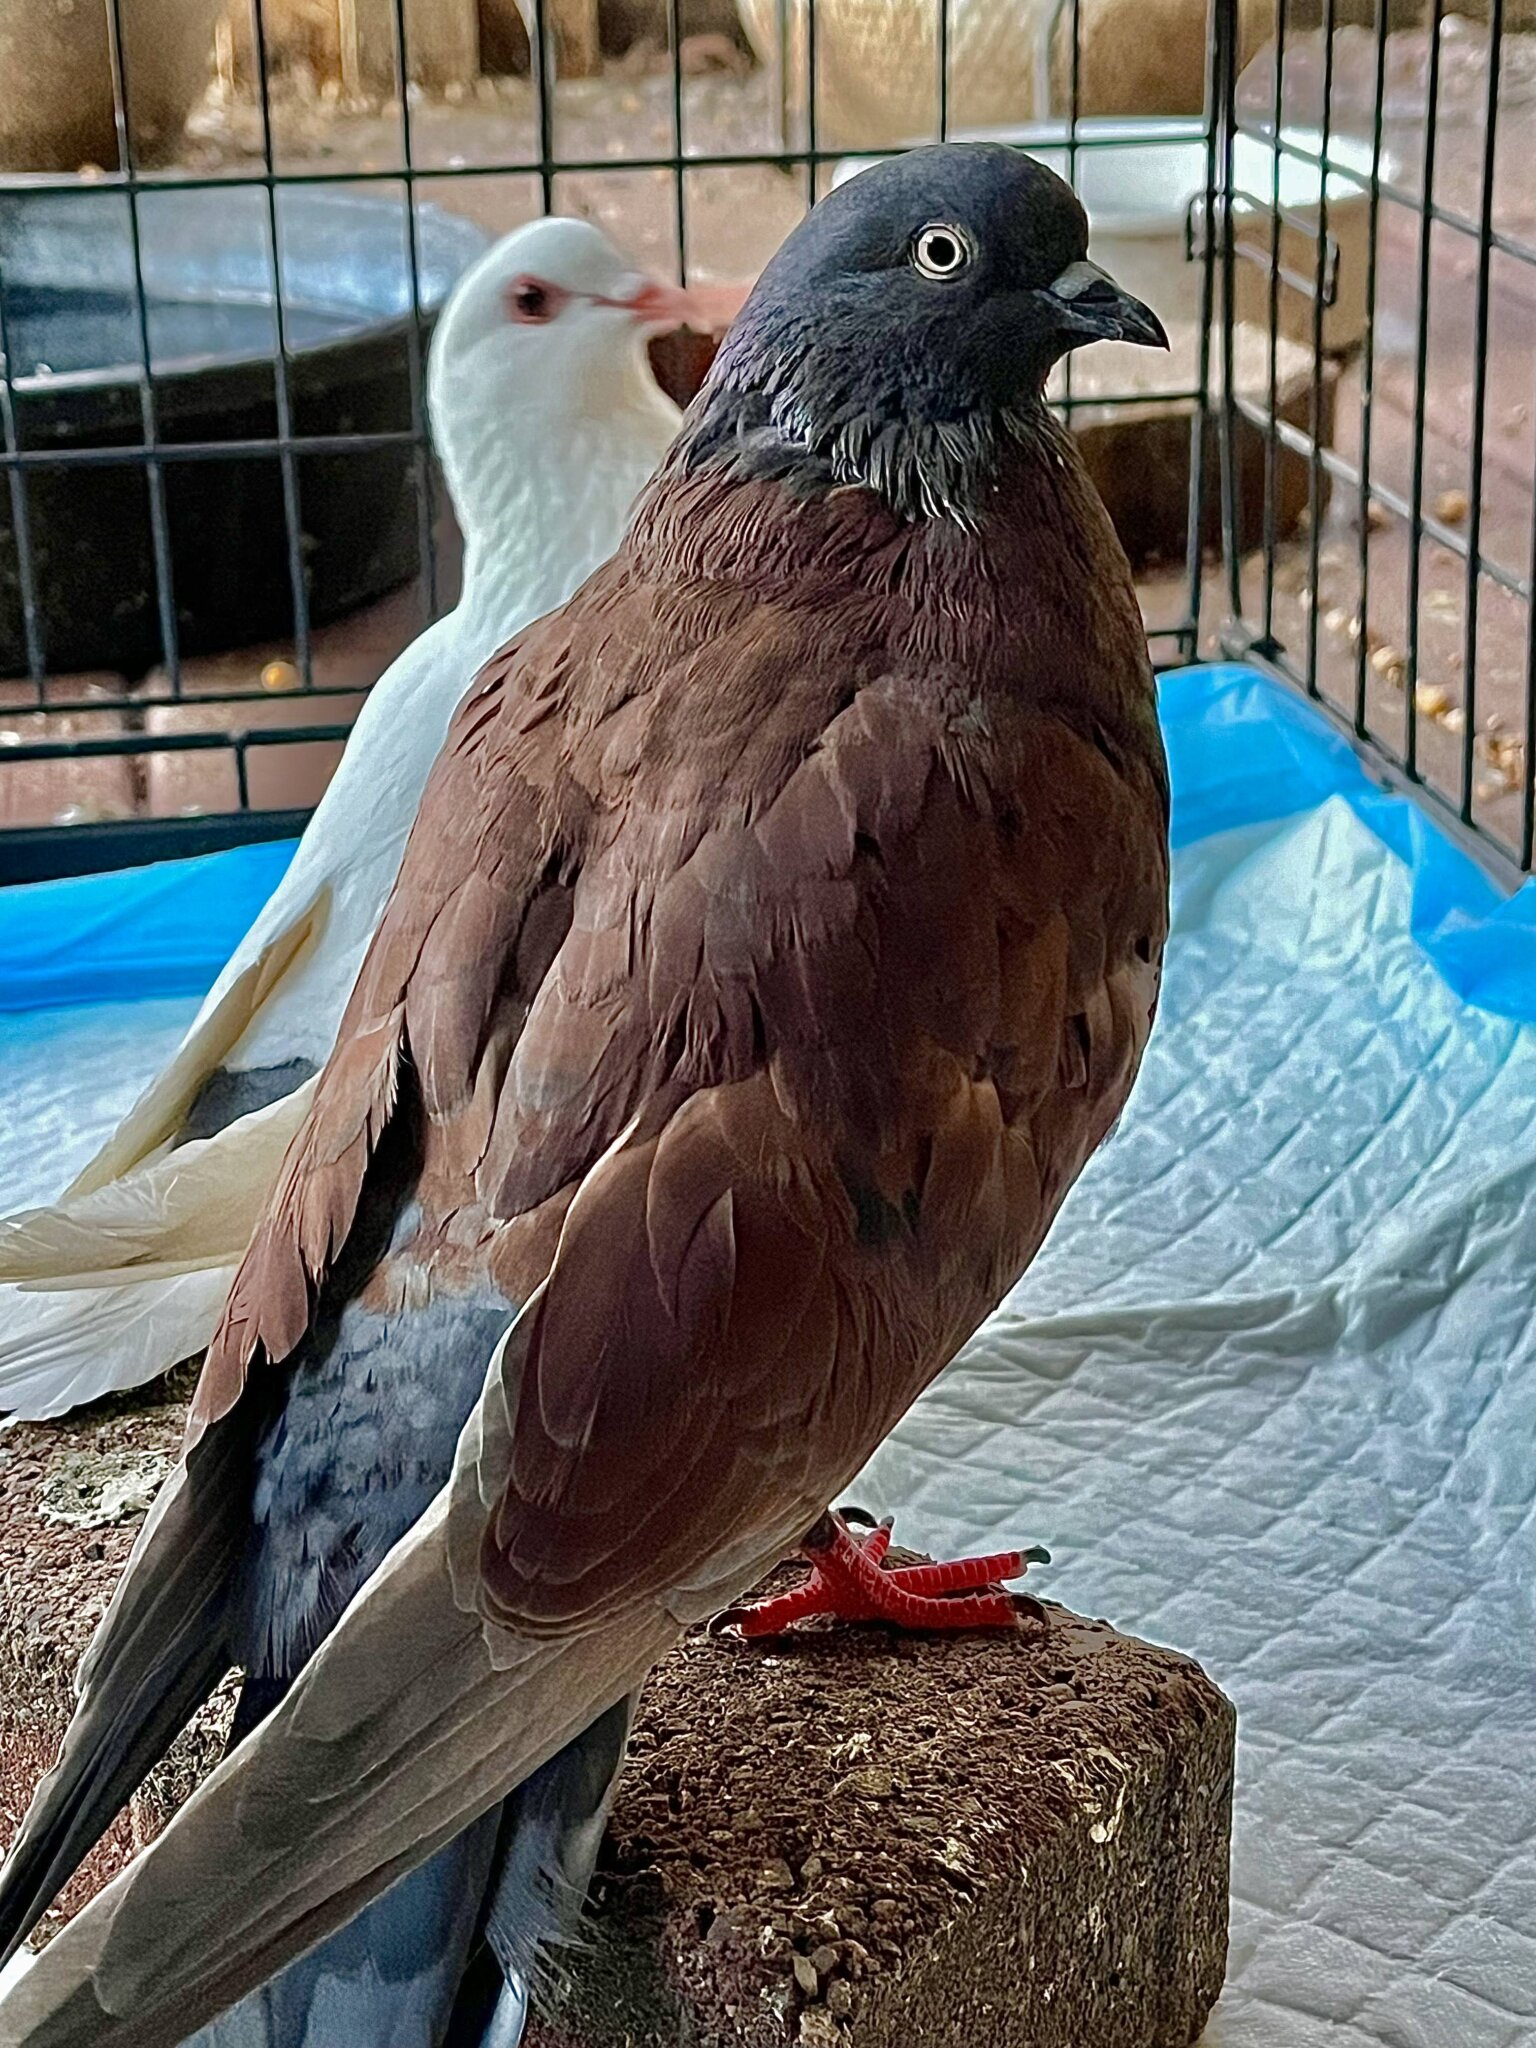 Pigeons up for adoption at Evelyn Alexander Wildlife Rescue Center